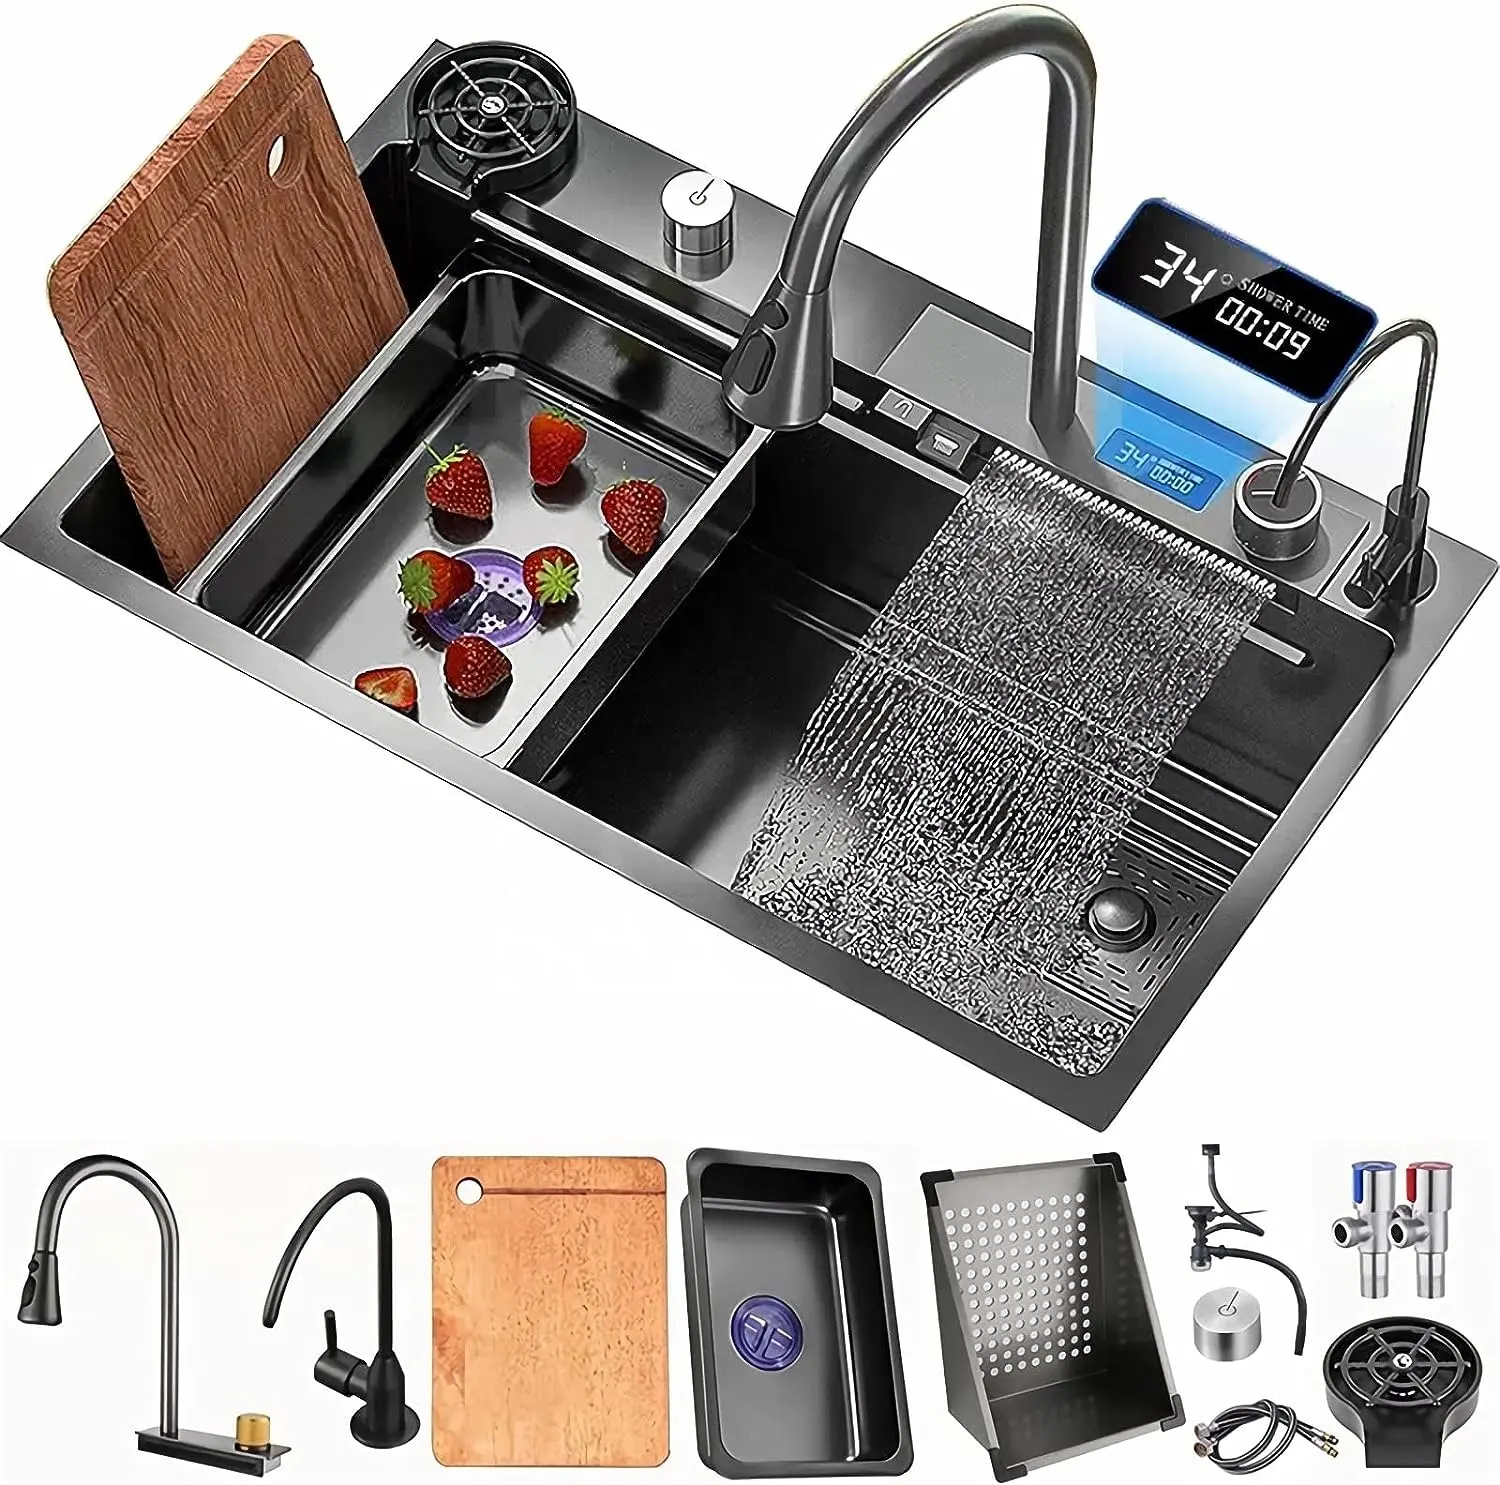 Tiktok Anti-Scratch 304 stainless steel LED Digital Display Waterfall Black stainless steel kitchen sink with accessories